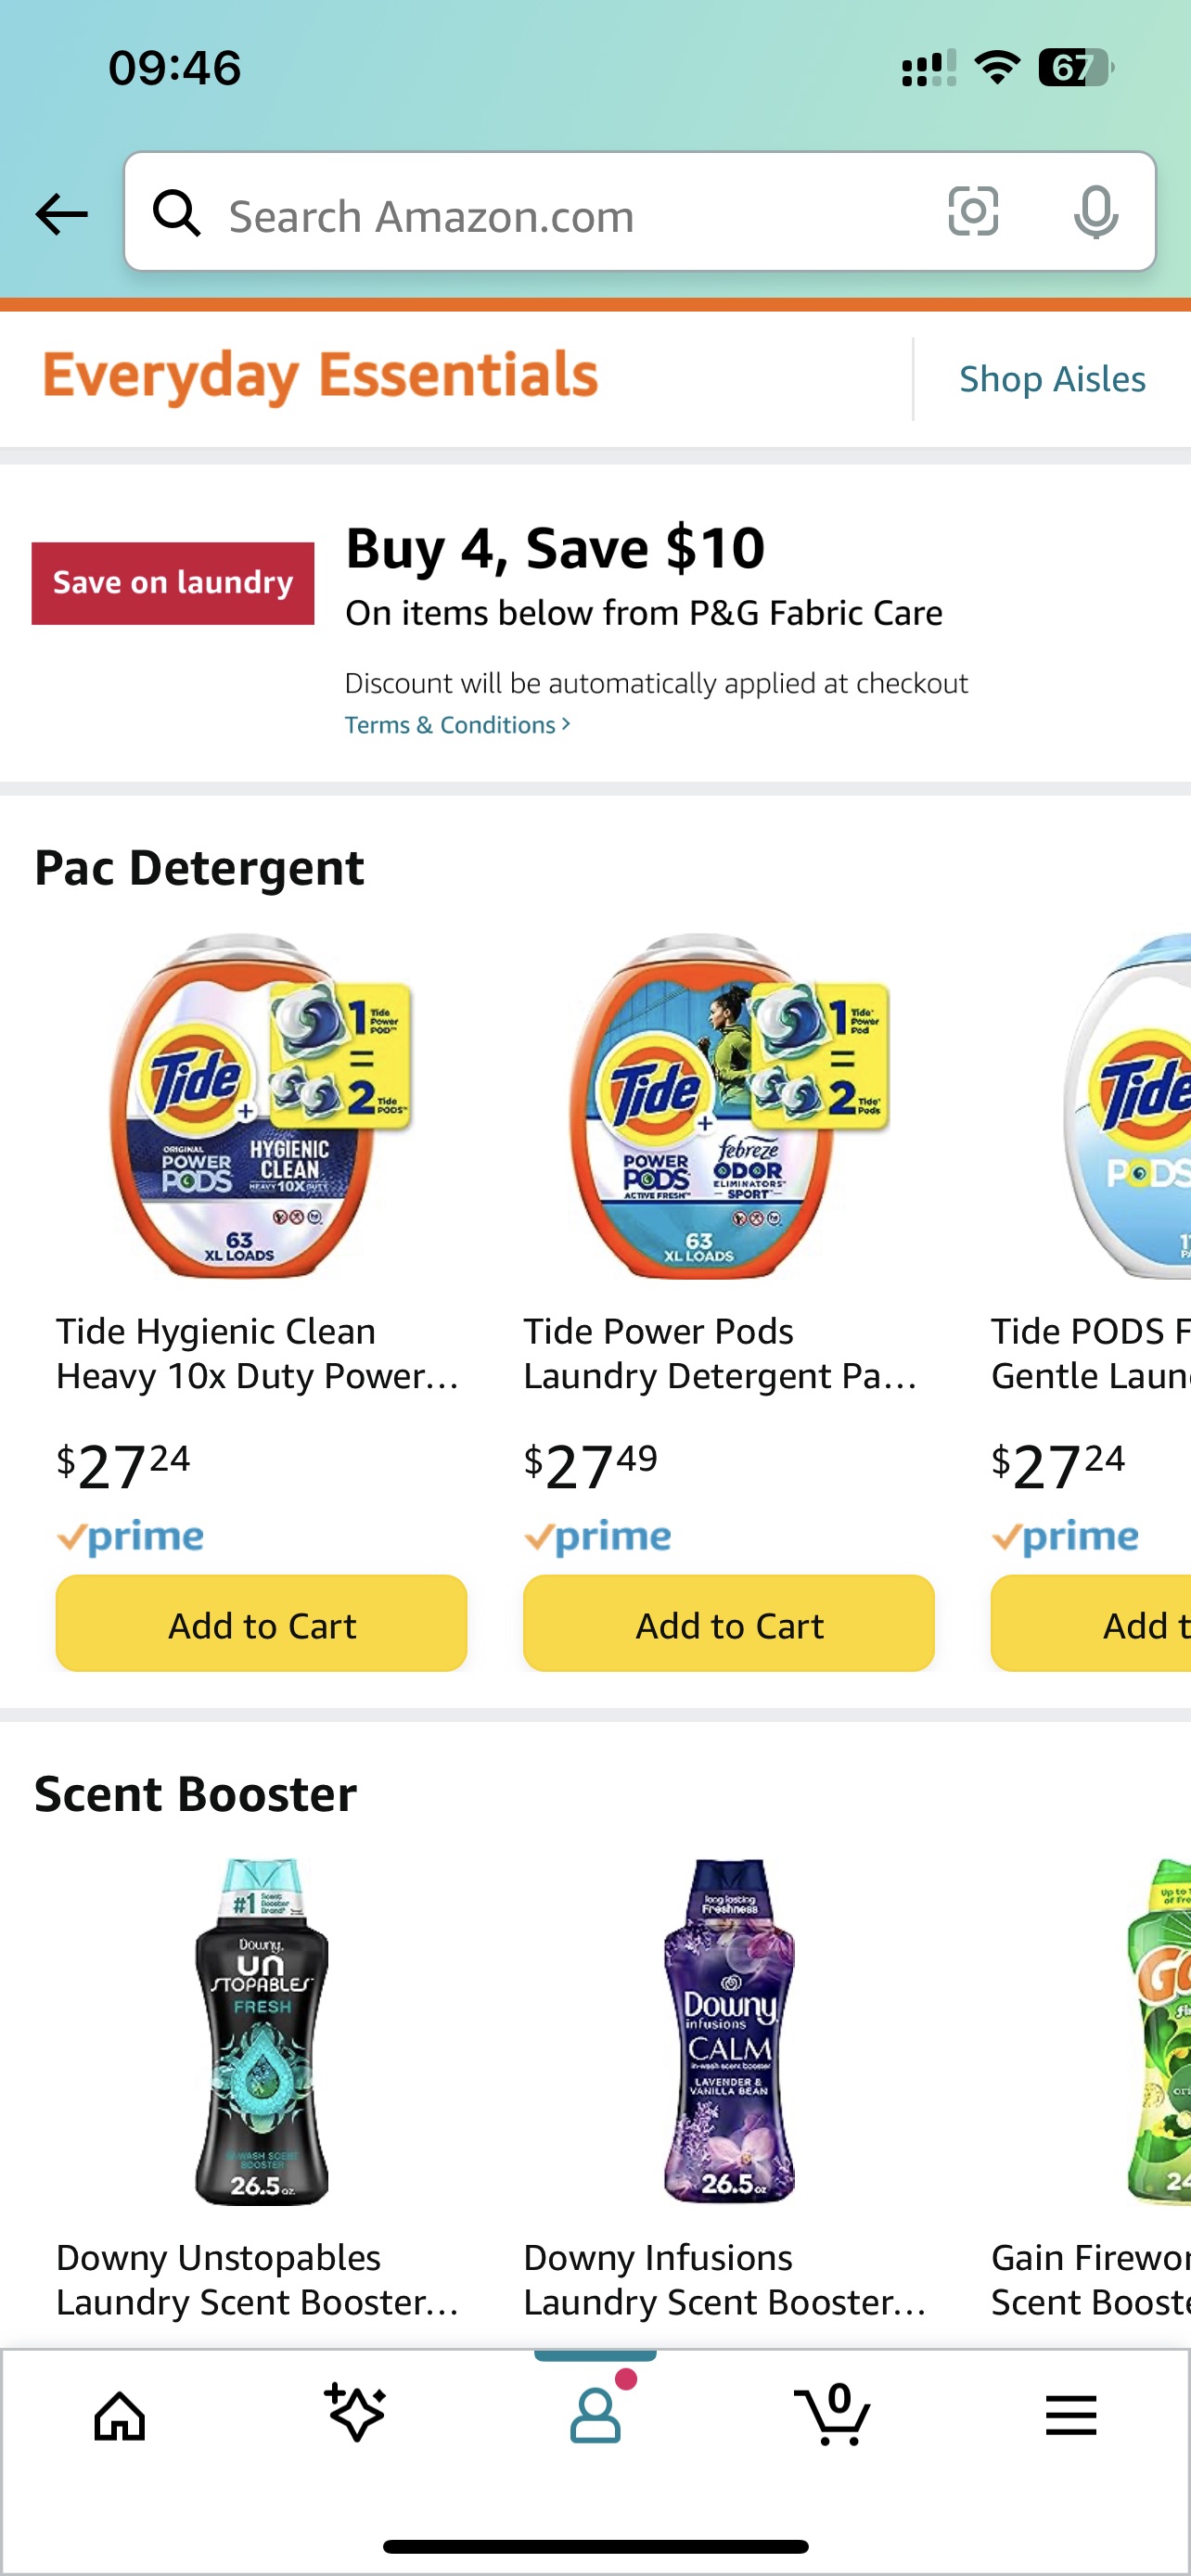 Amazon Groceries: Buy 4, Save $10 on P&G Fabric Care